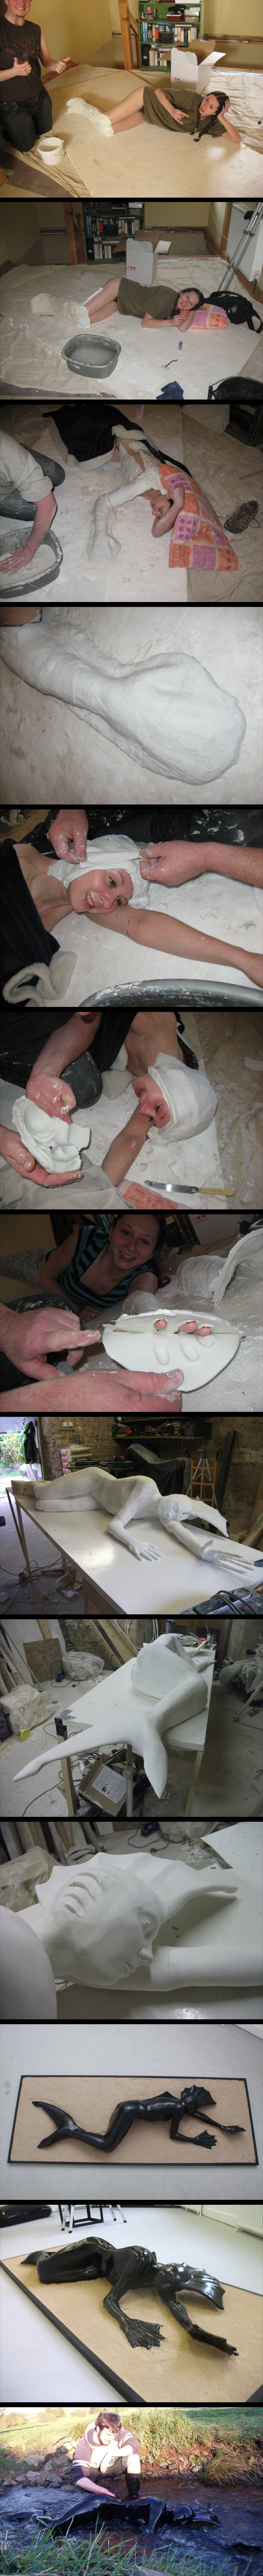 The making of a mermaid…